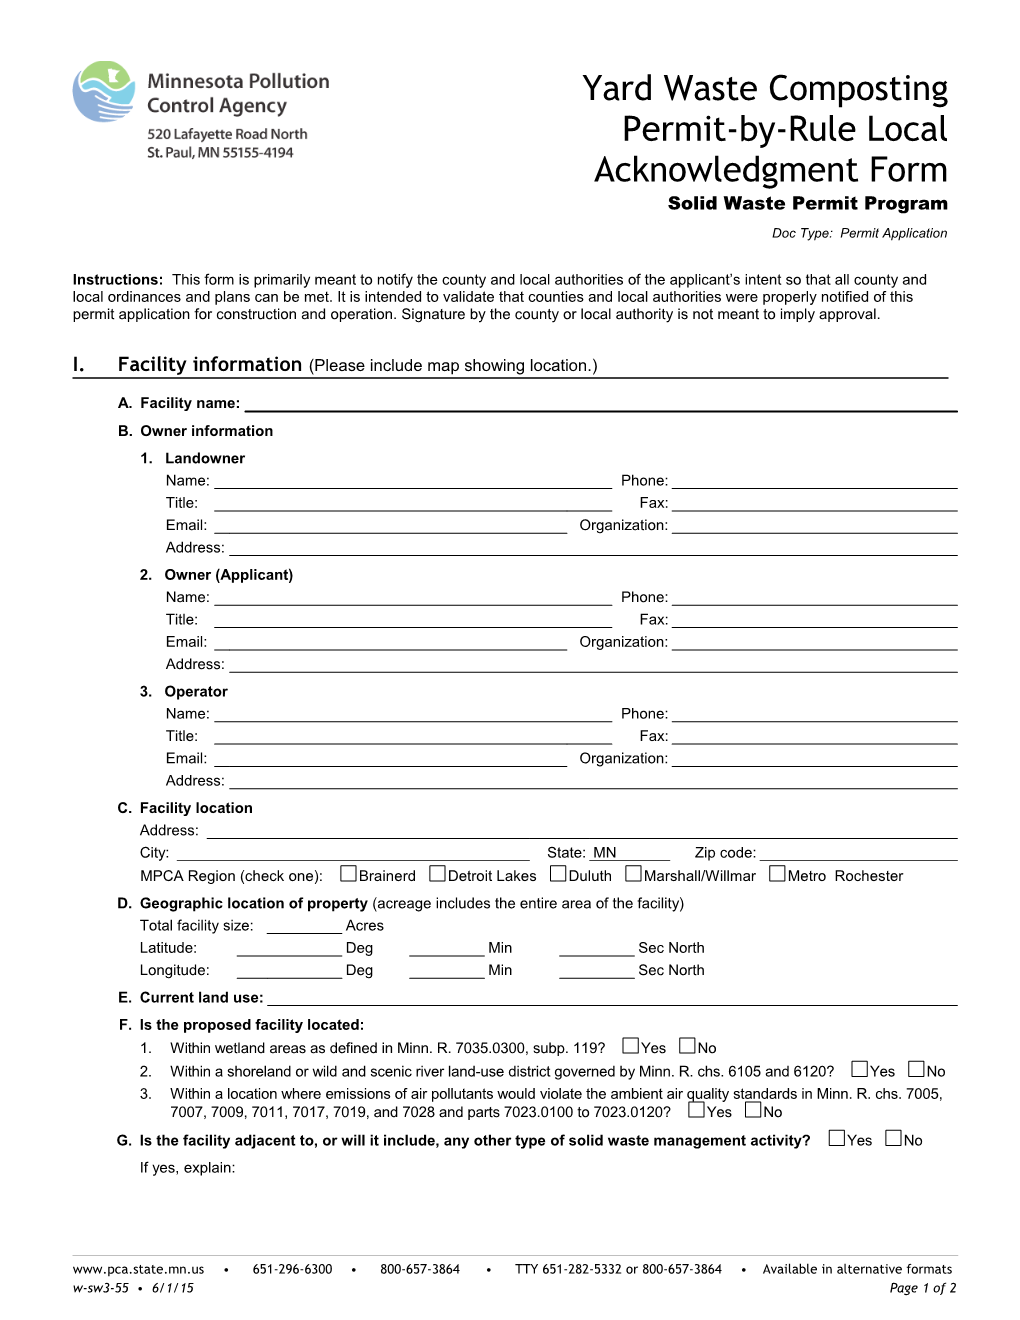 Yard Waste Composting Permit-By-Rule Local Acknowledgement Form